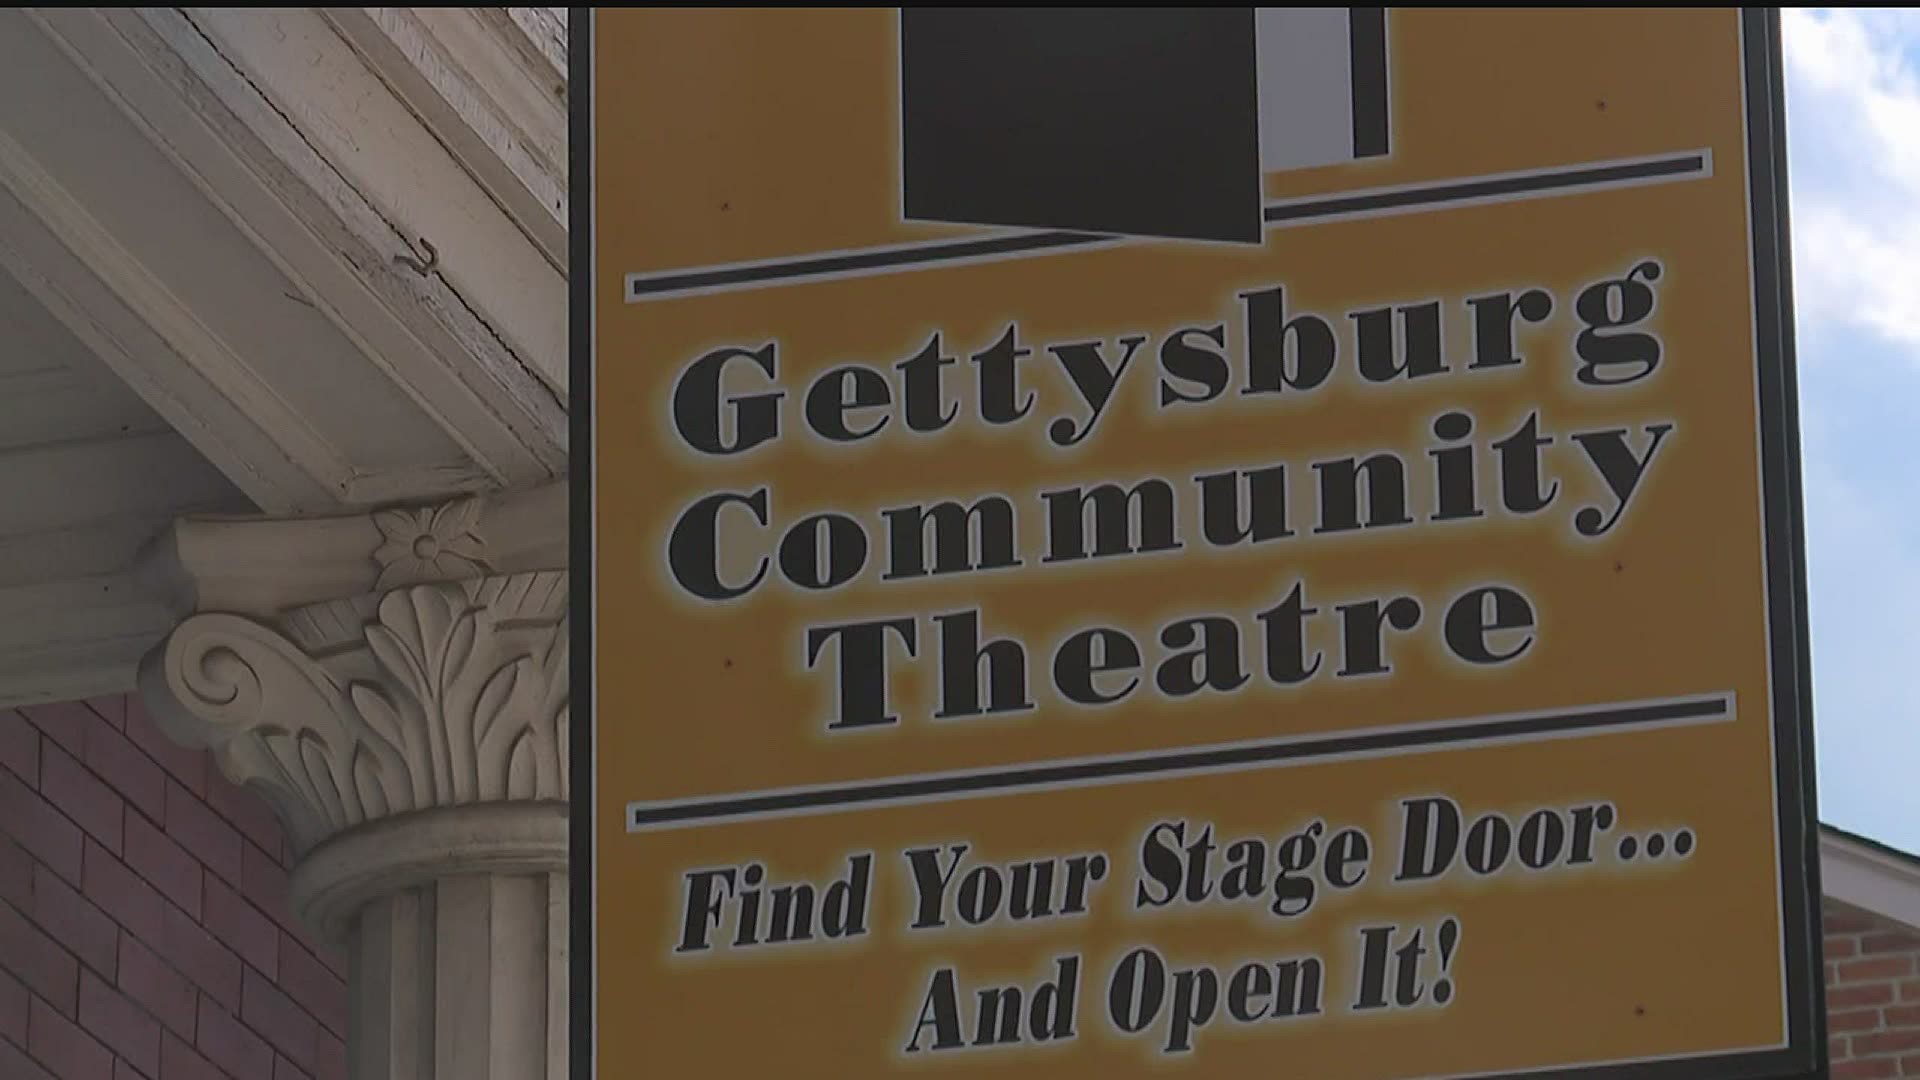 The theater will remain closed while trying to perform via Zoom, with reduced staff and reality closure could push into 2021.